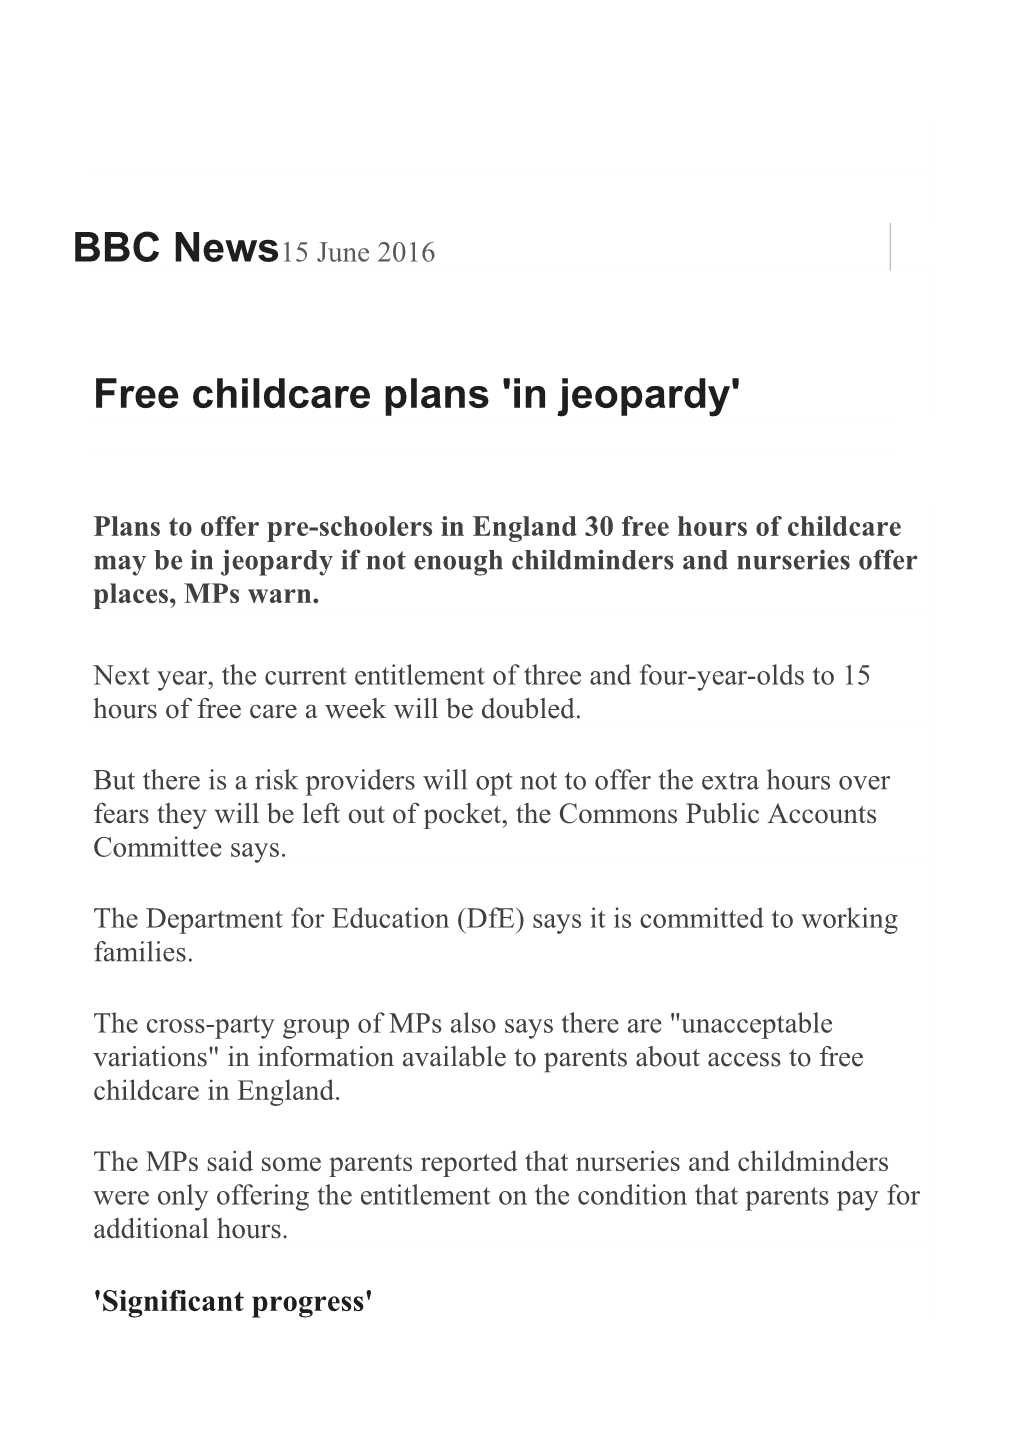 Free Childcare Plans 'In Jeopardy'